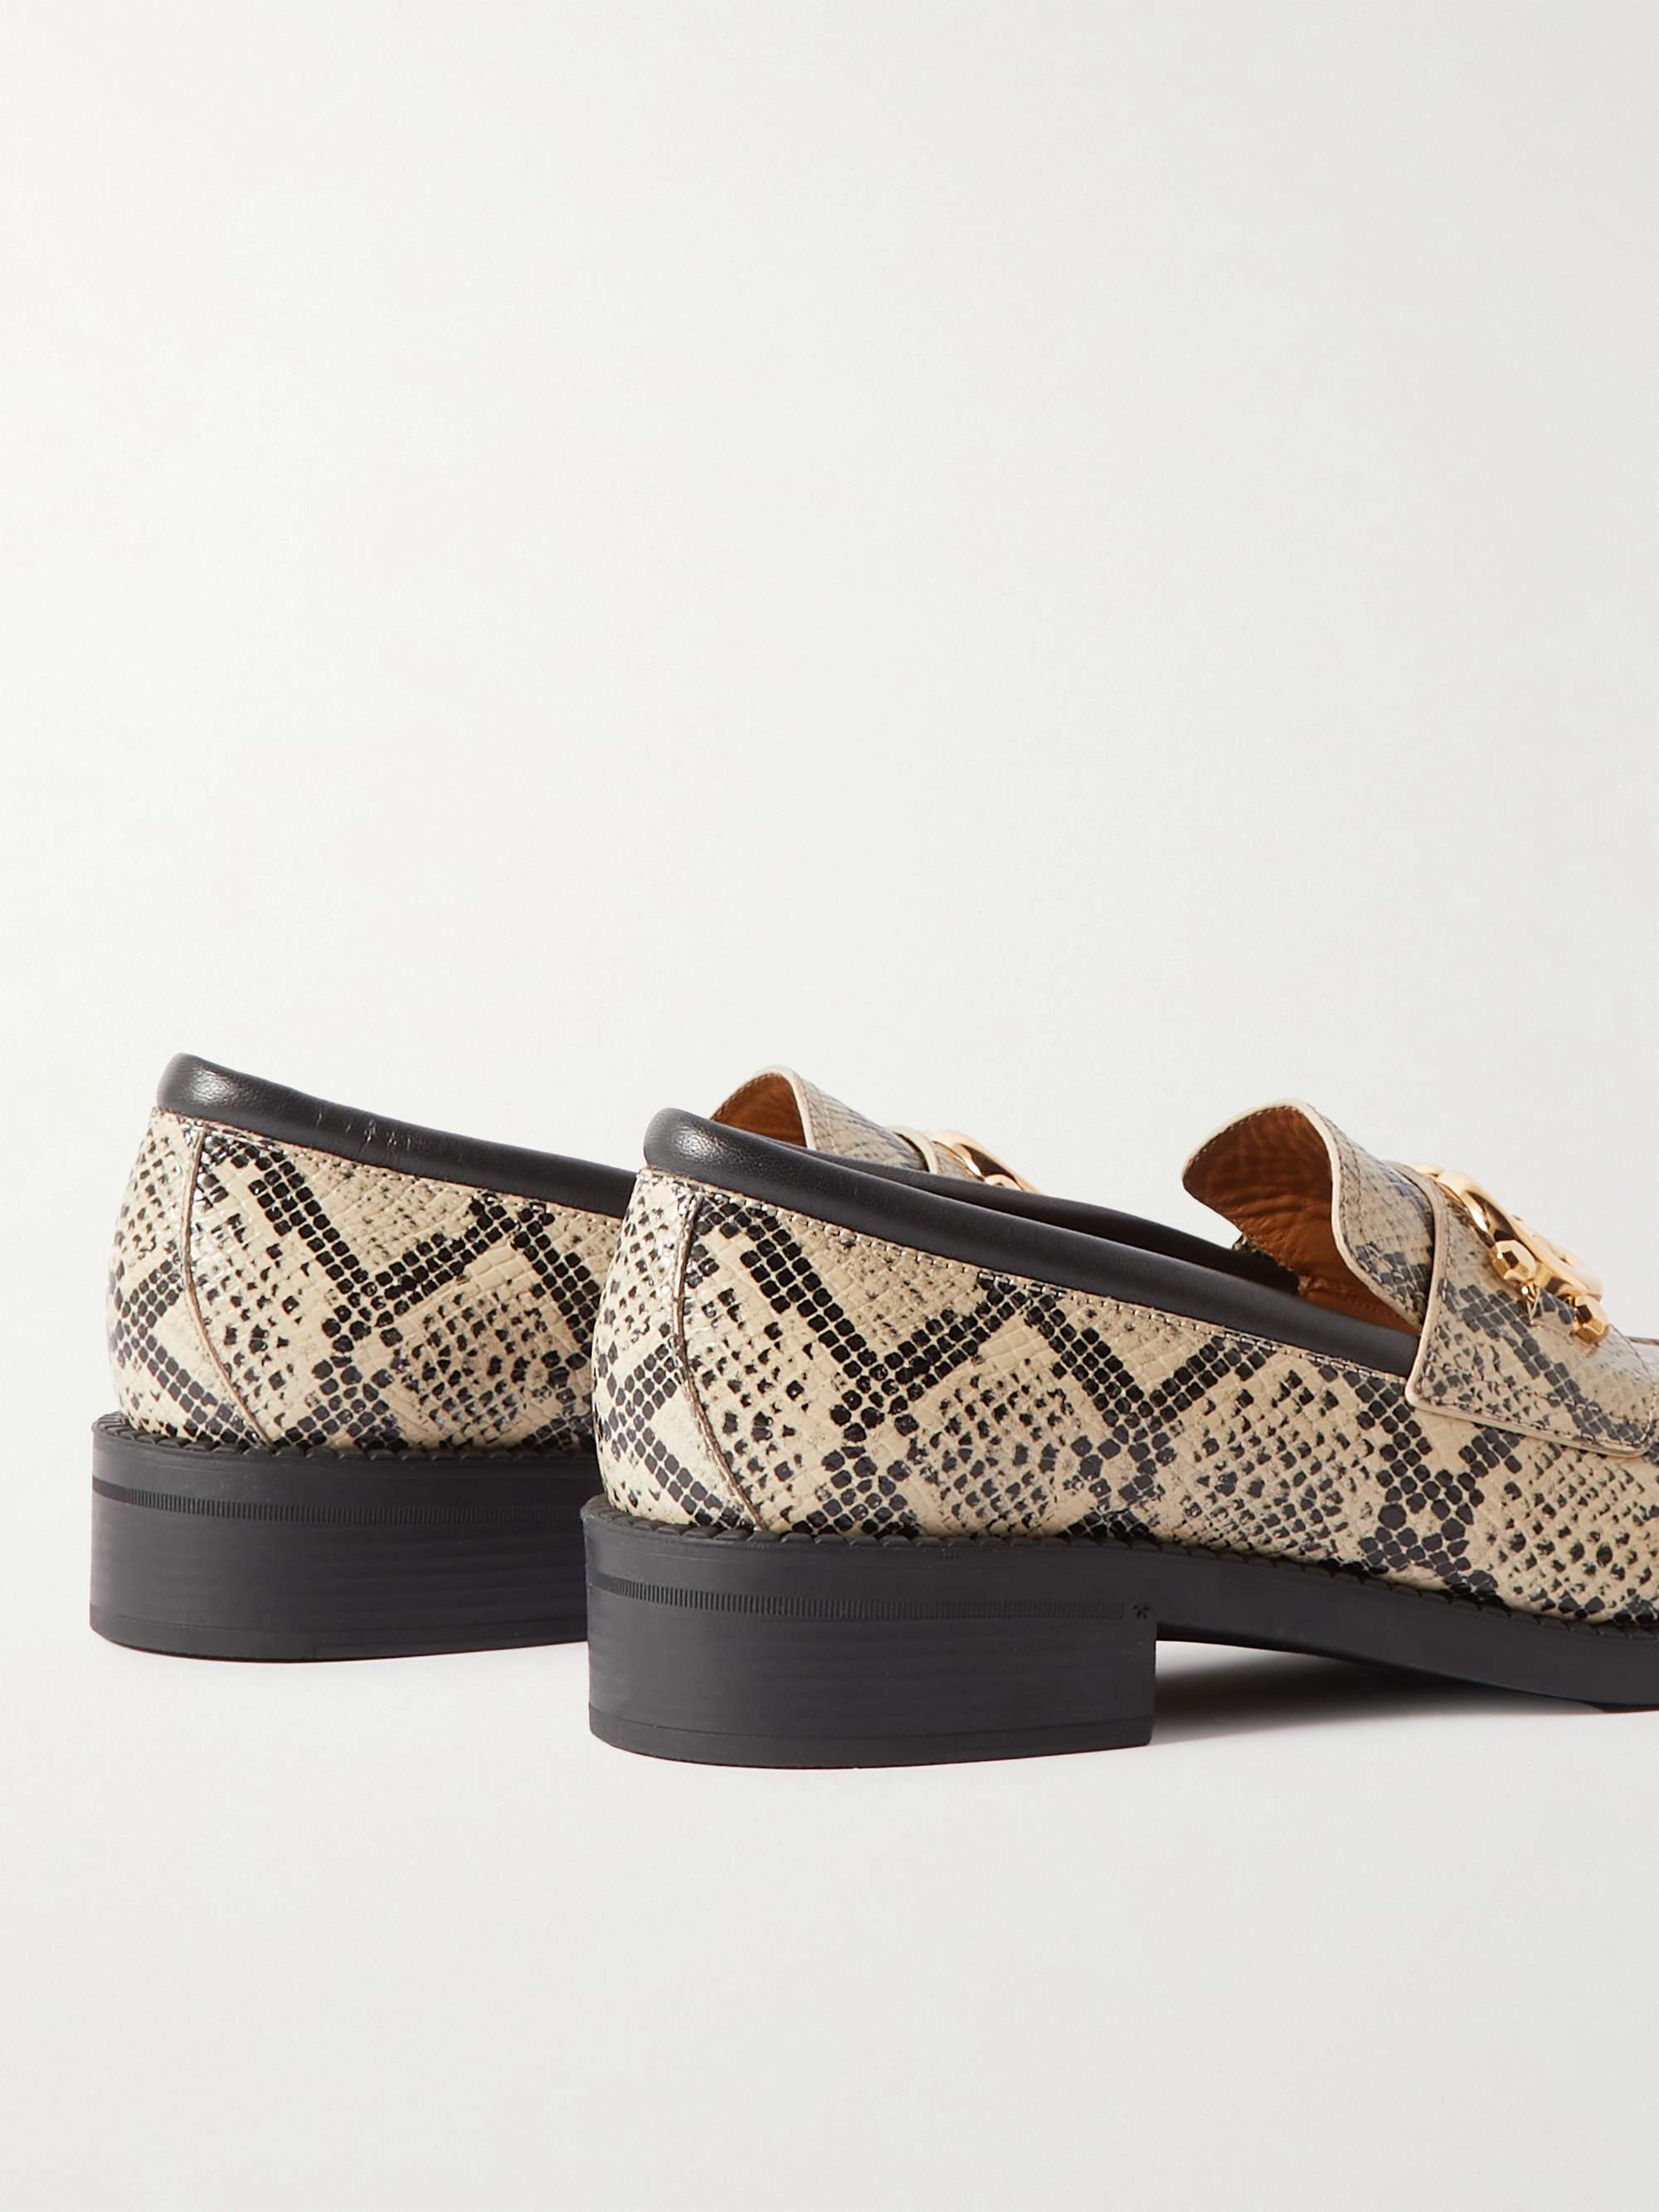 GUCCI Logo-Embellished Croc-Effect Leather Loafers